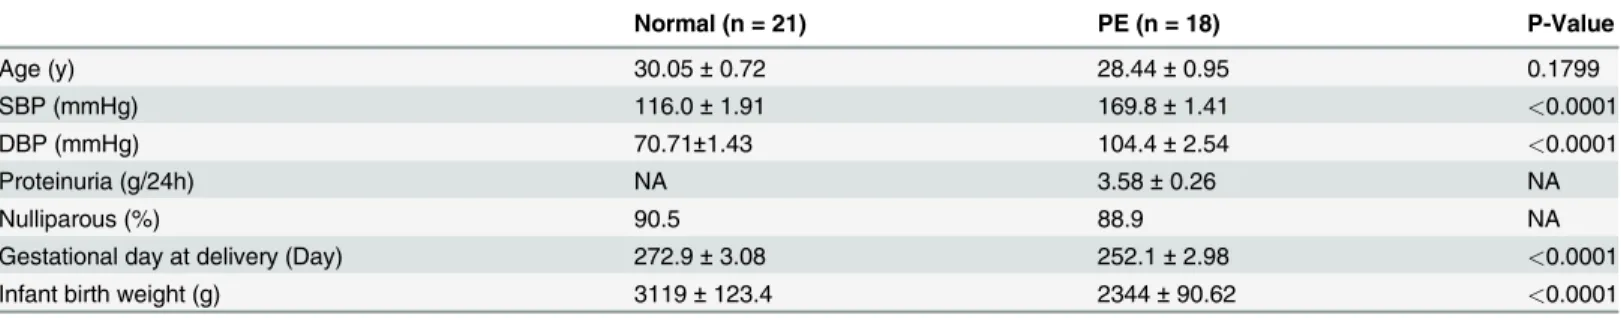 Table 1. Clinical parameters of patients enrolled in our study.